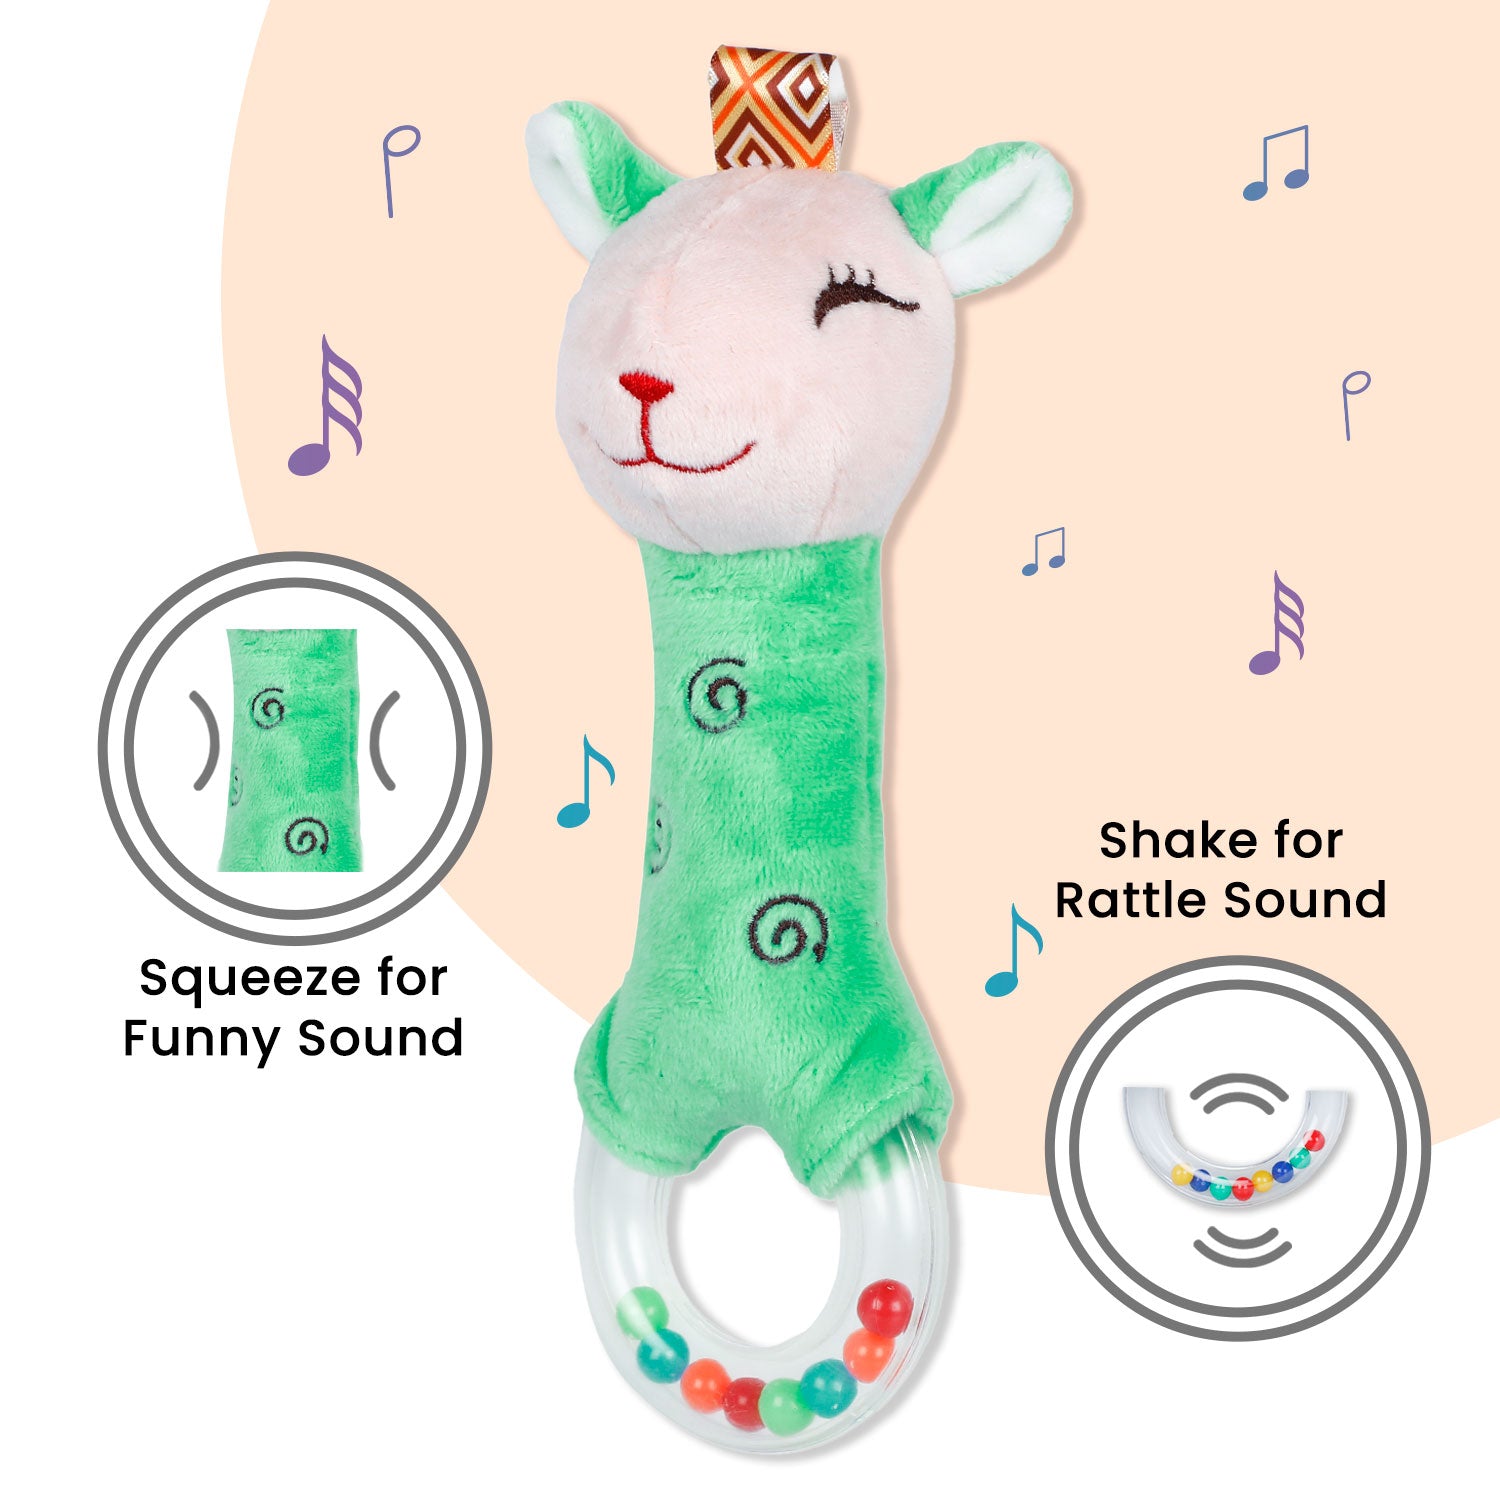 Baby Moo Lovely Animal Squeaker Sound Handheld Rattle Toy - Green